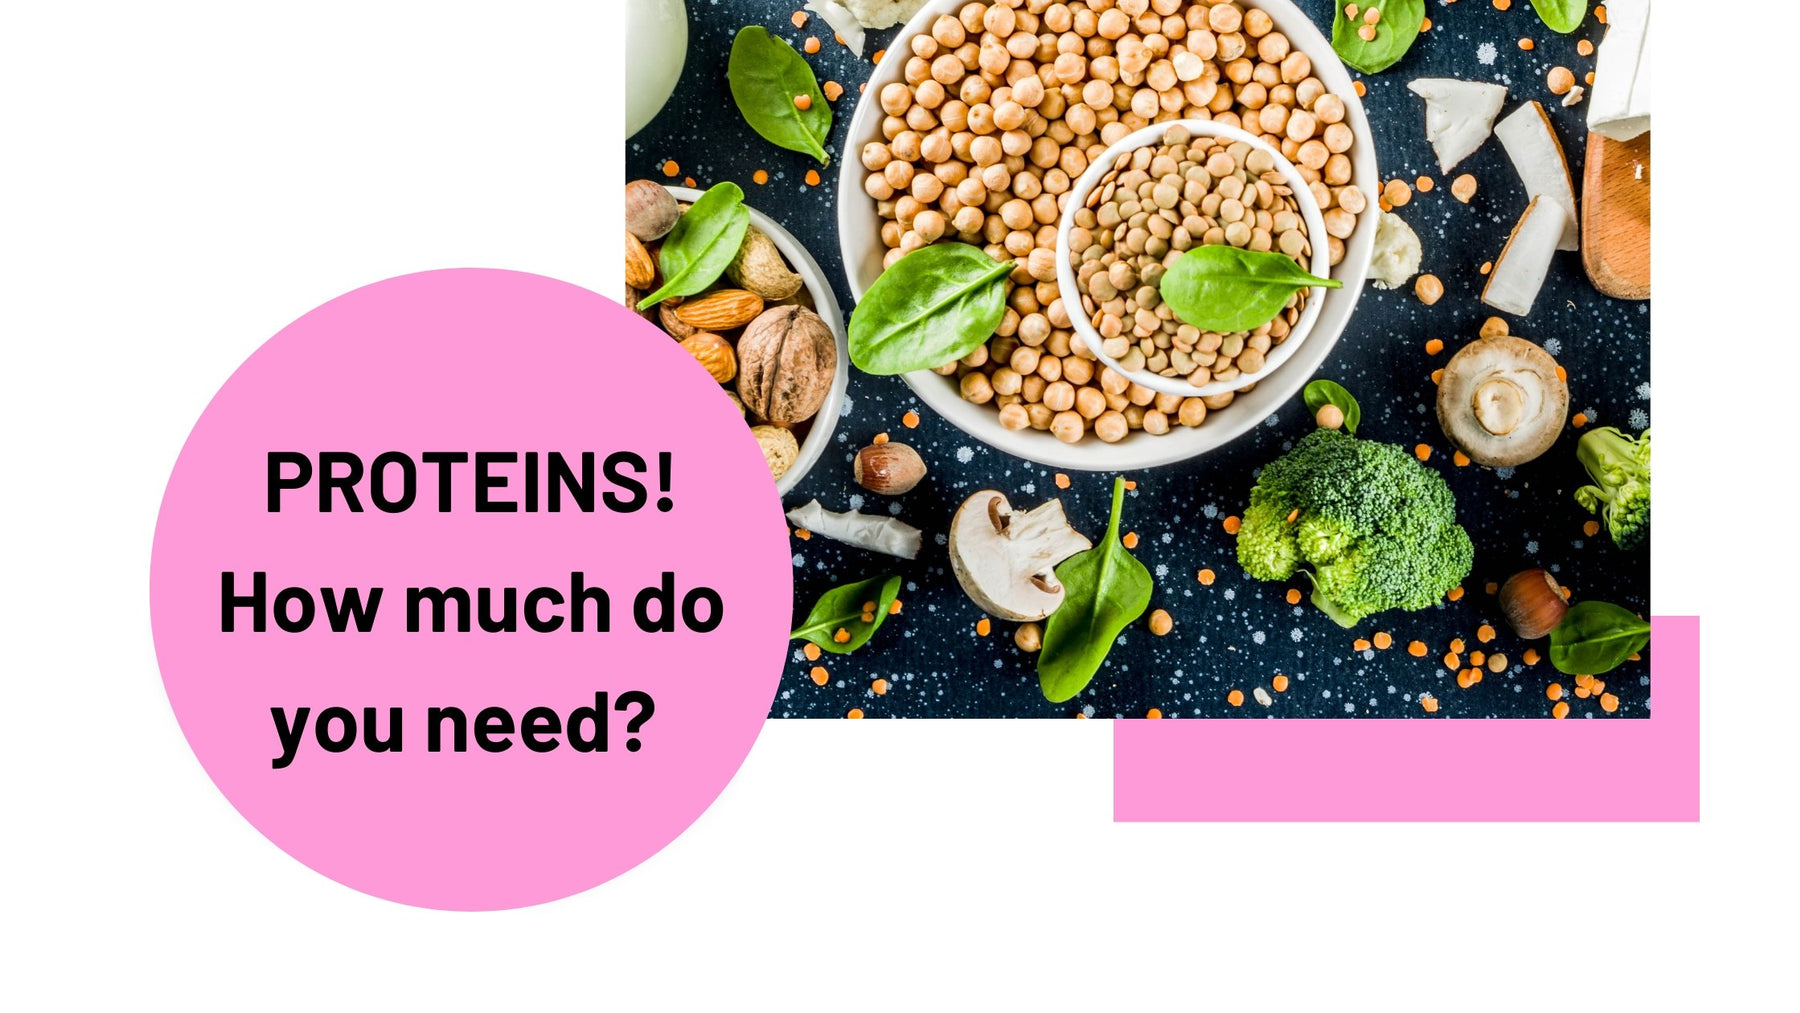 Proteins! How much do you need? - Roshni Sanghvi